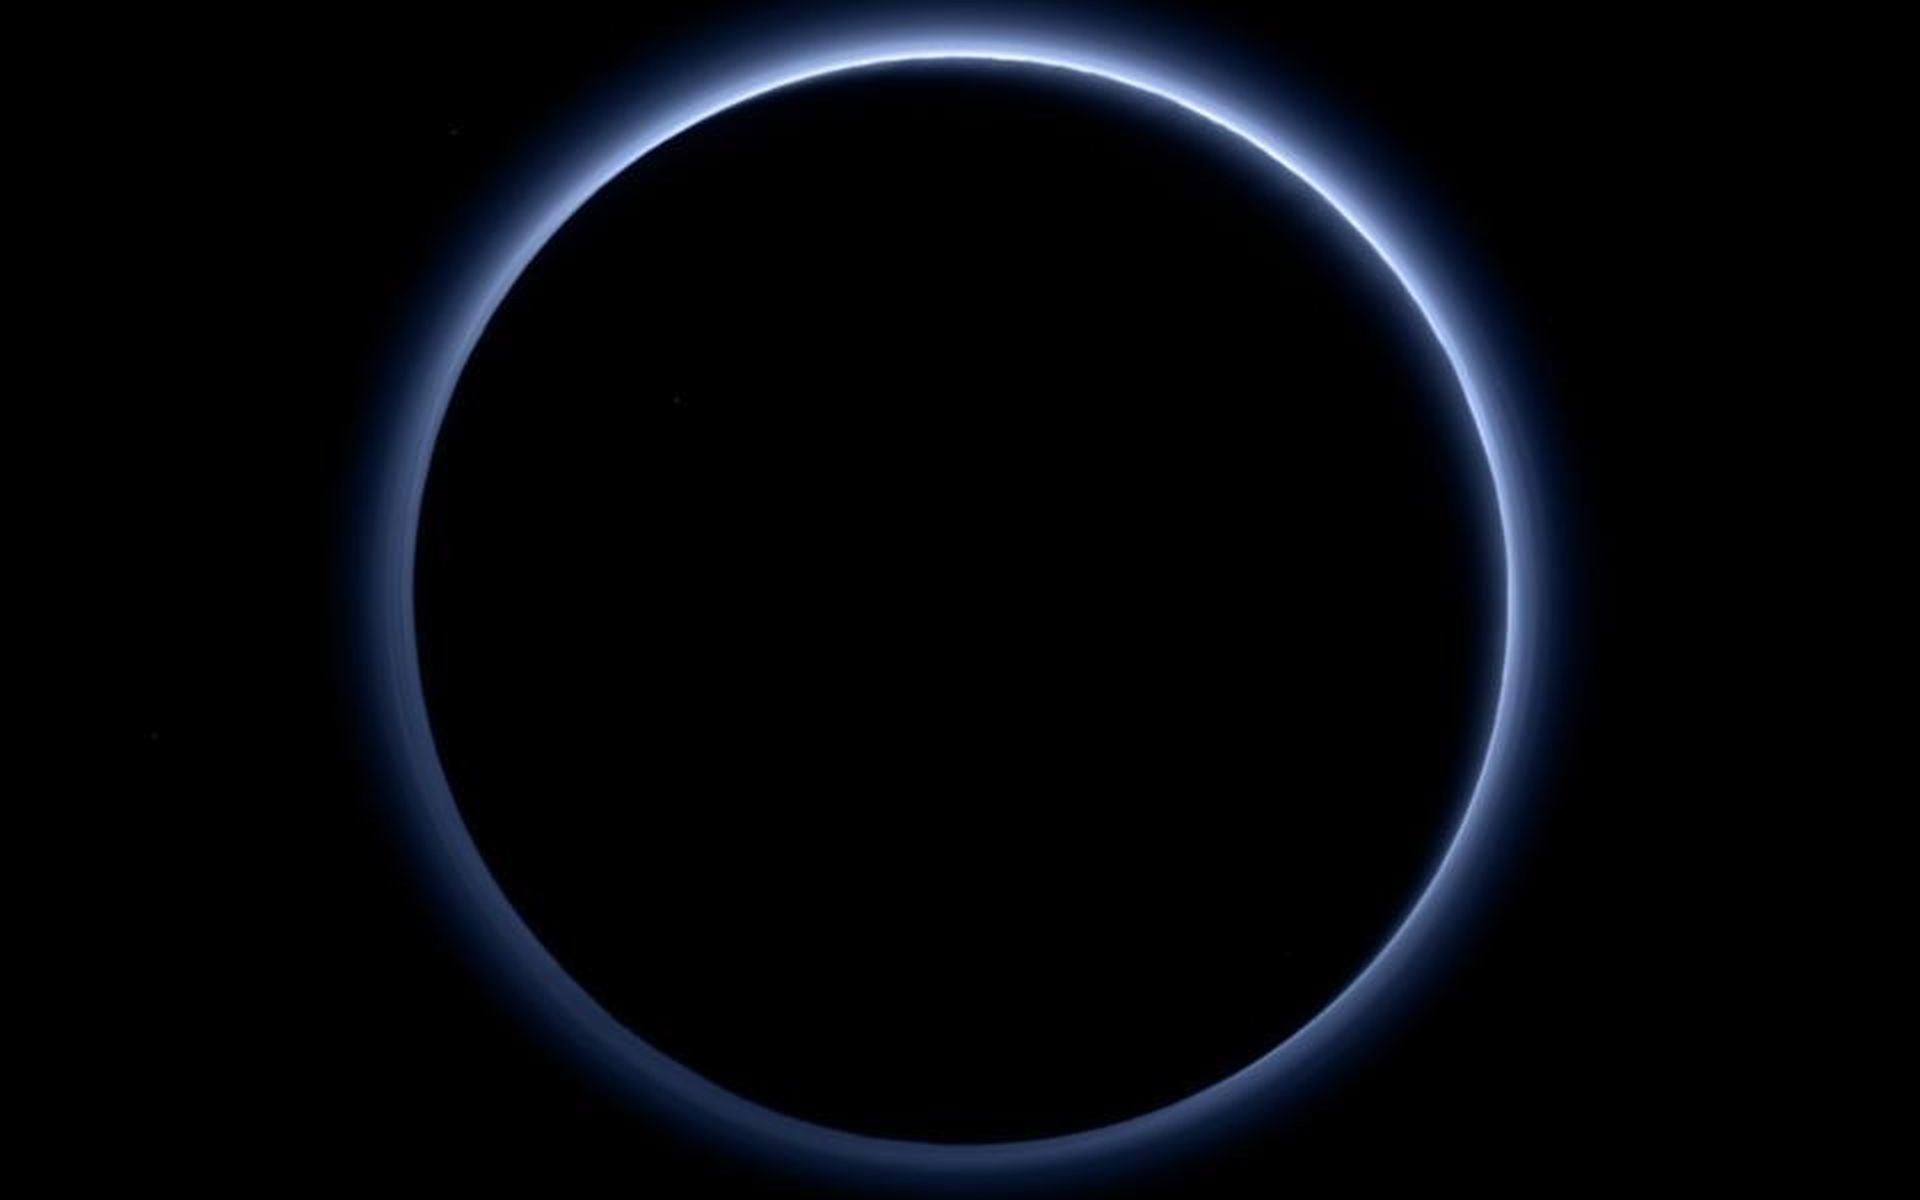 Plutos haze layer shows its blue color in this picture taken by NASAs New Horizons